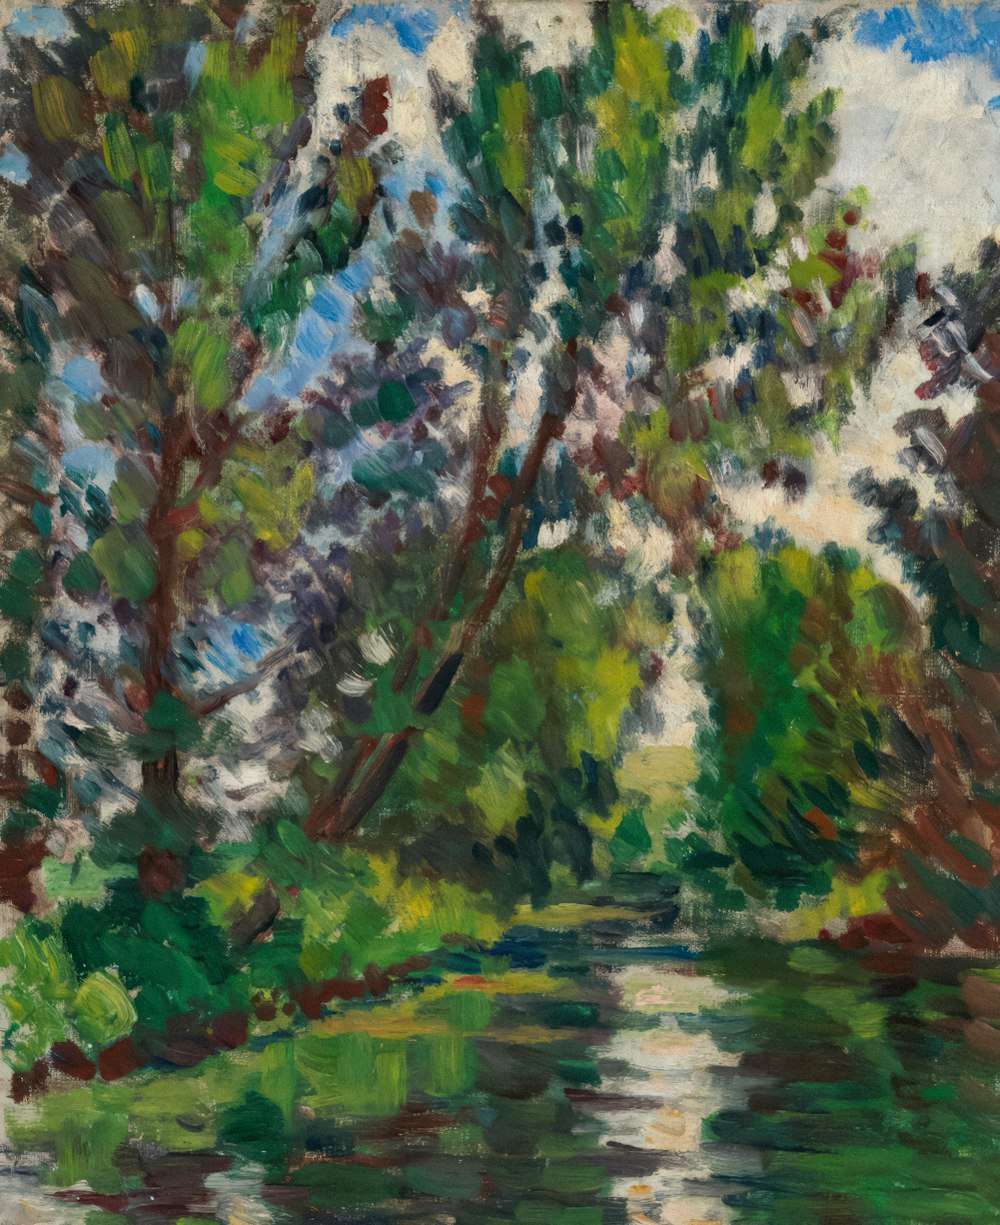 a painting of a river with trees in the background